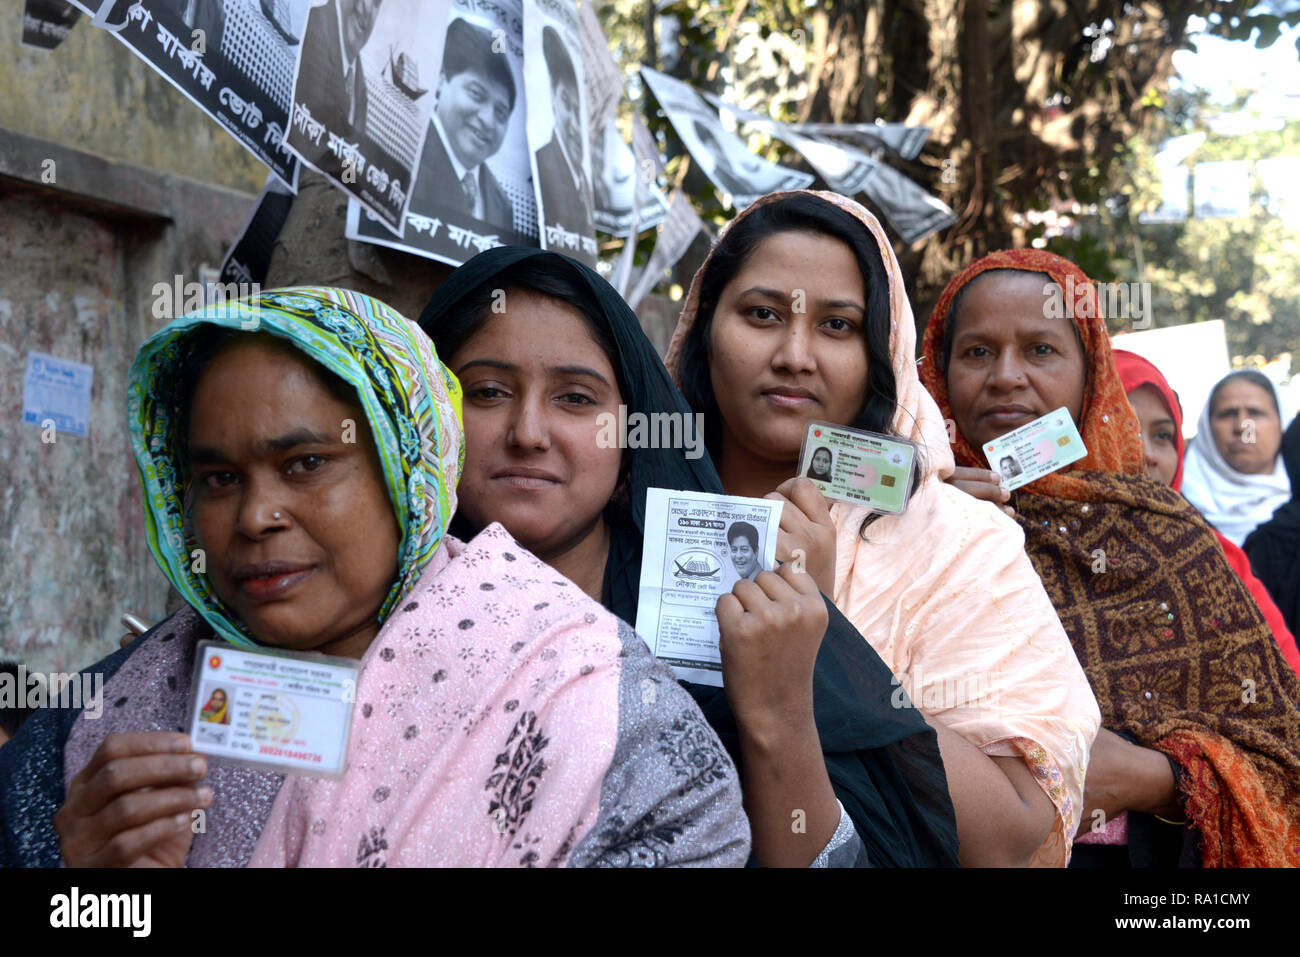 Dhaka, Bangladesh. 30th Dec, 2018. Voters line up at a polling station in Dhaka, Bangladesh, Dec. 30, 2018. Nationwide voting opened Sunday morning in Bangladesh's general elections to elect hundreds of representatives to parliament amid reports of stray violence. Credit: Salim Reza/Xinhua/Alamy Live News Credit: Xinhua/Alamy Live News Stock Photo